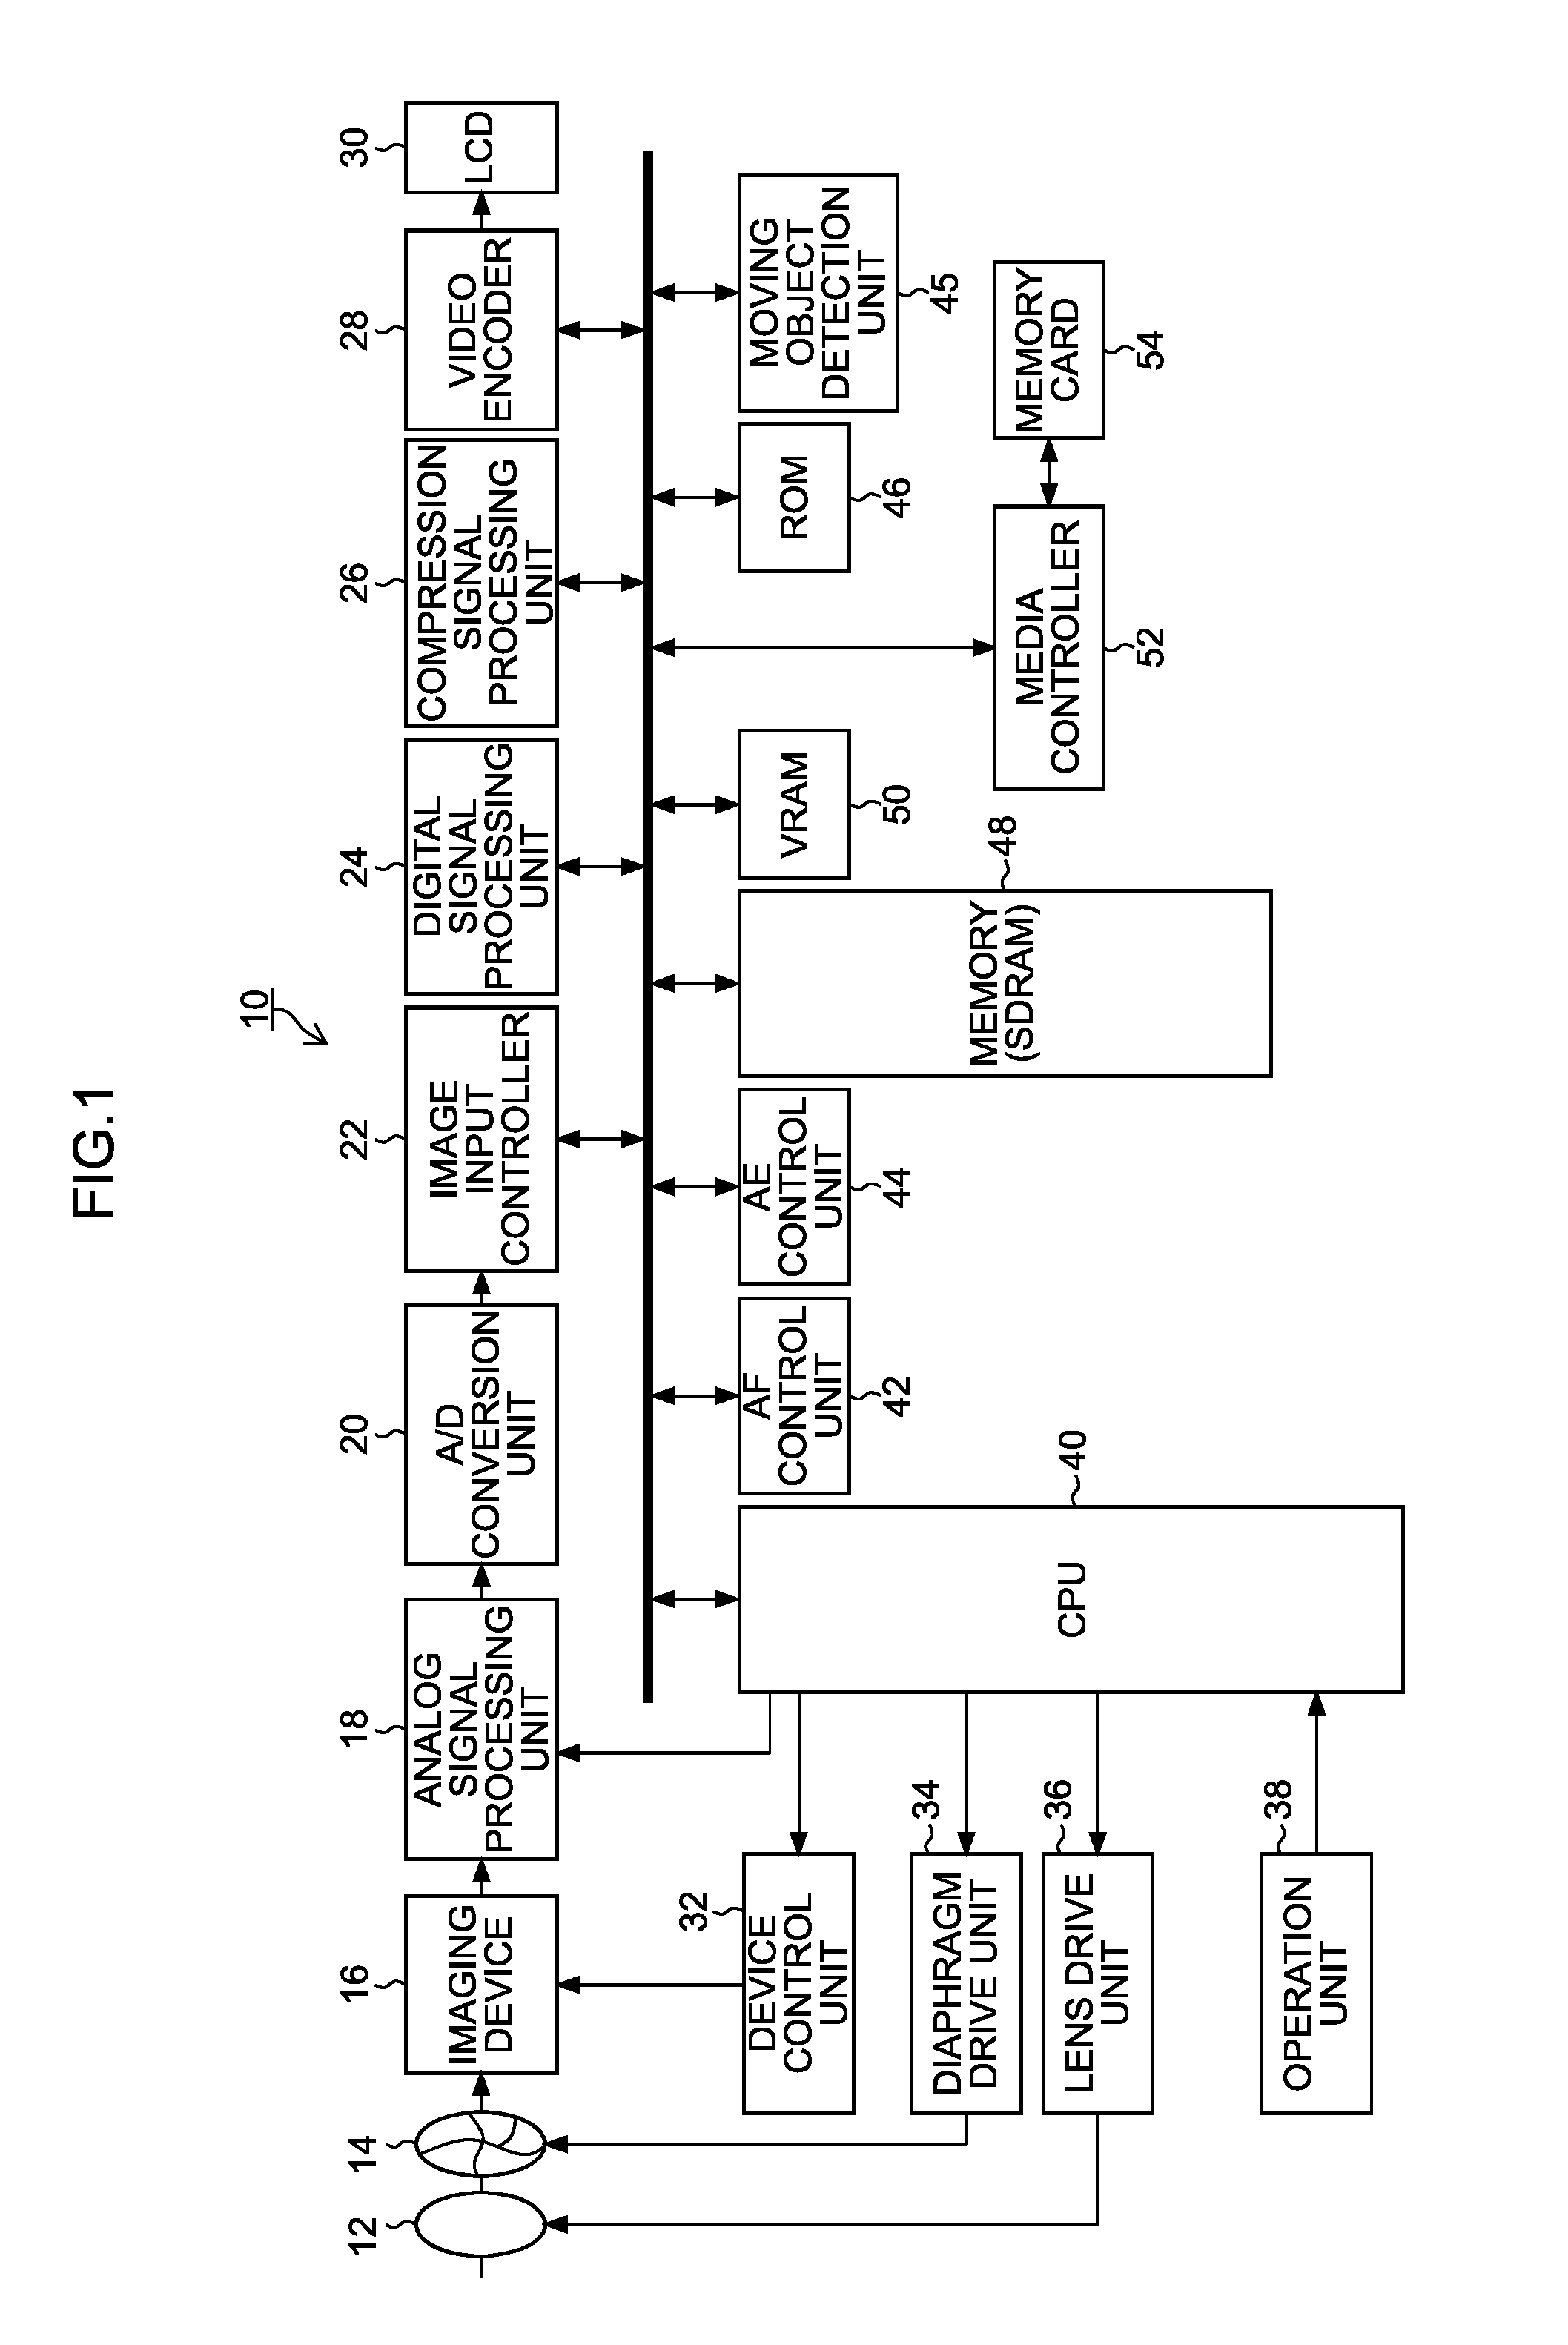 Device and method for detecting moving objects